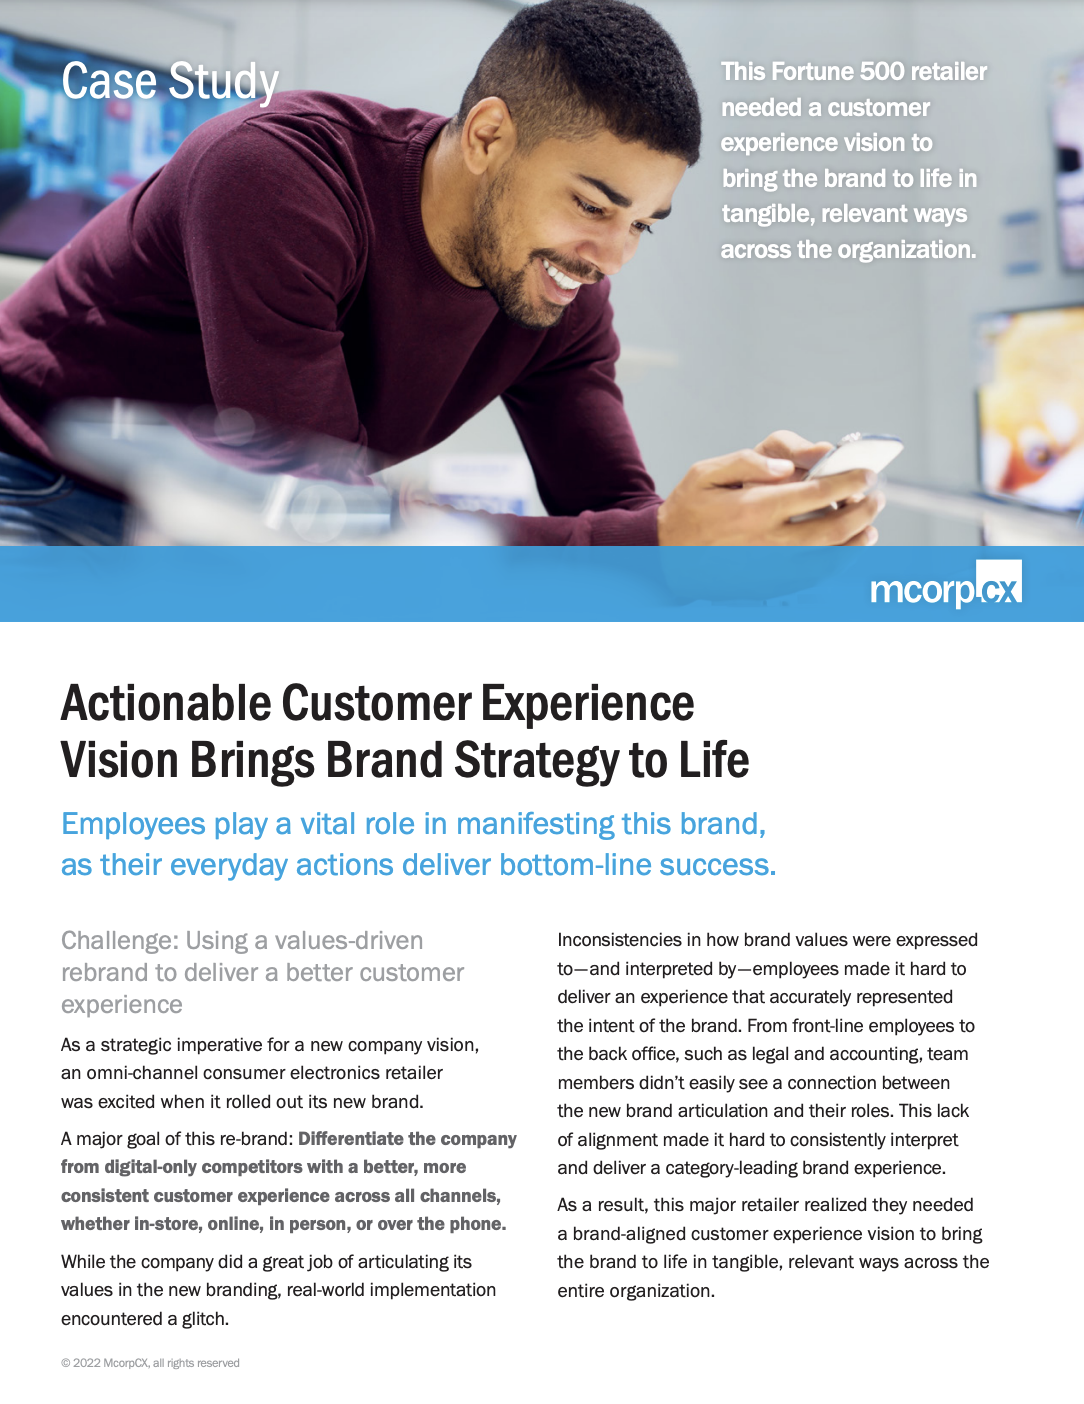 Actionable Customer Experience Vision Brings Brand Strategy to Life